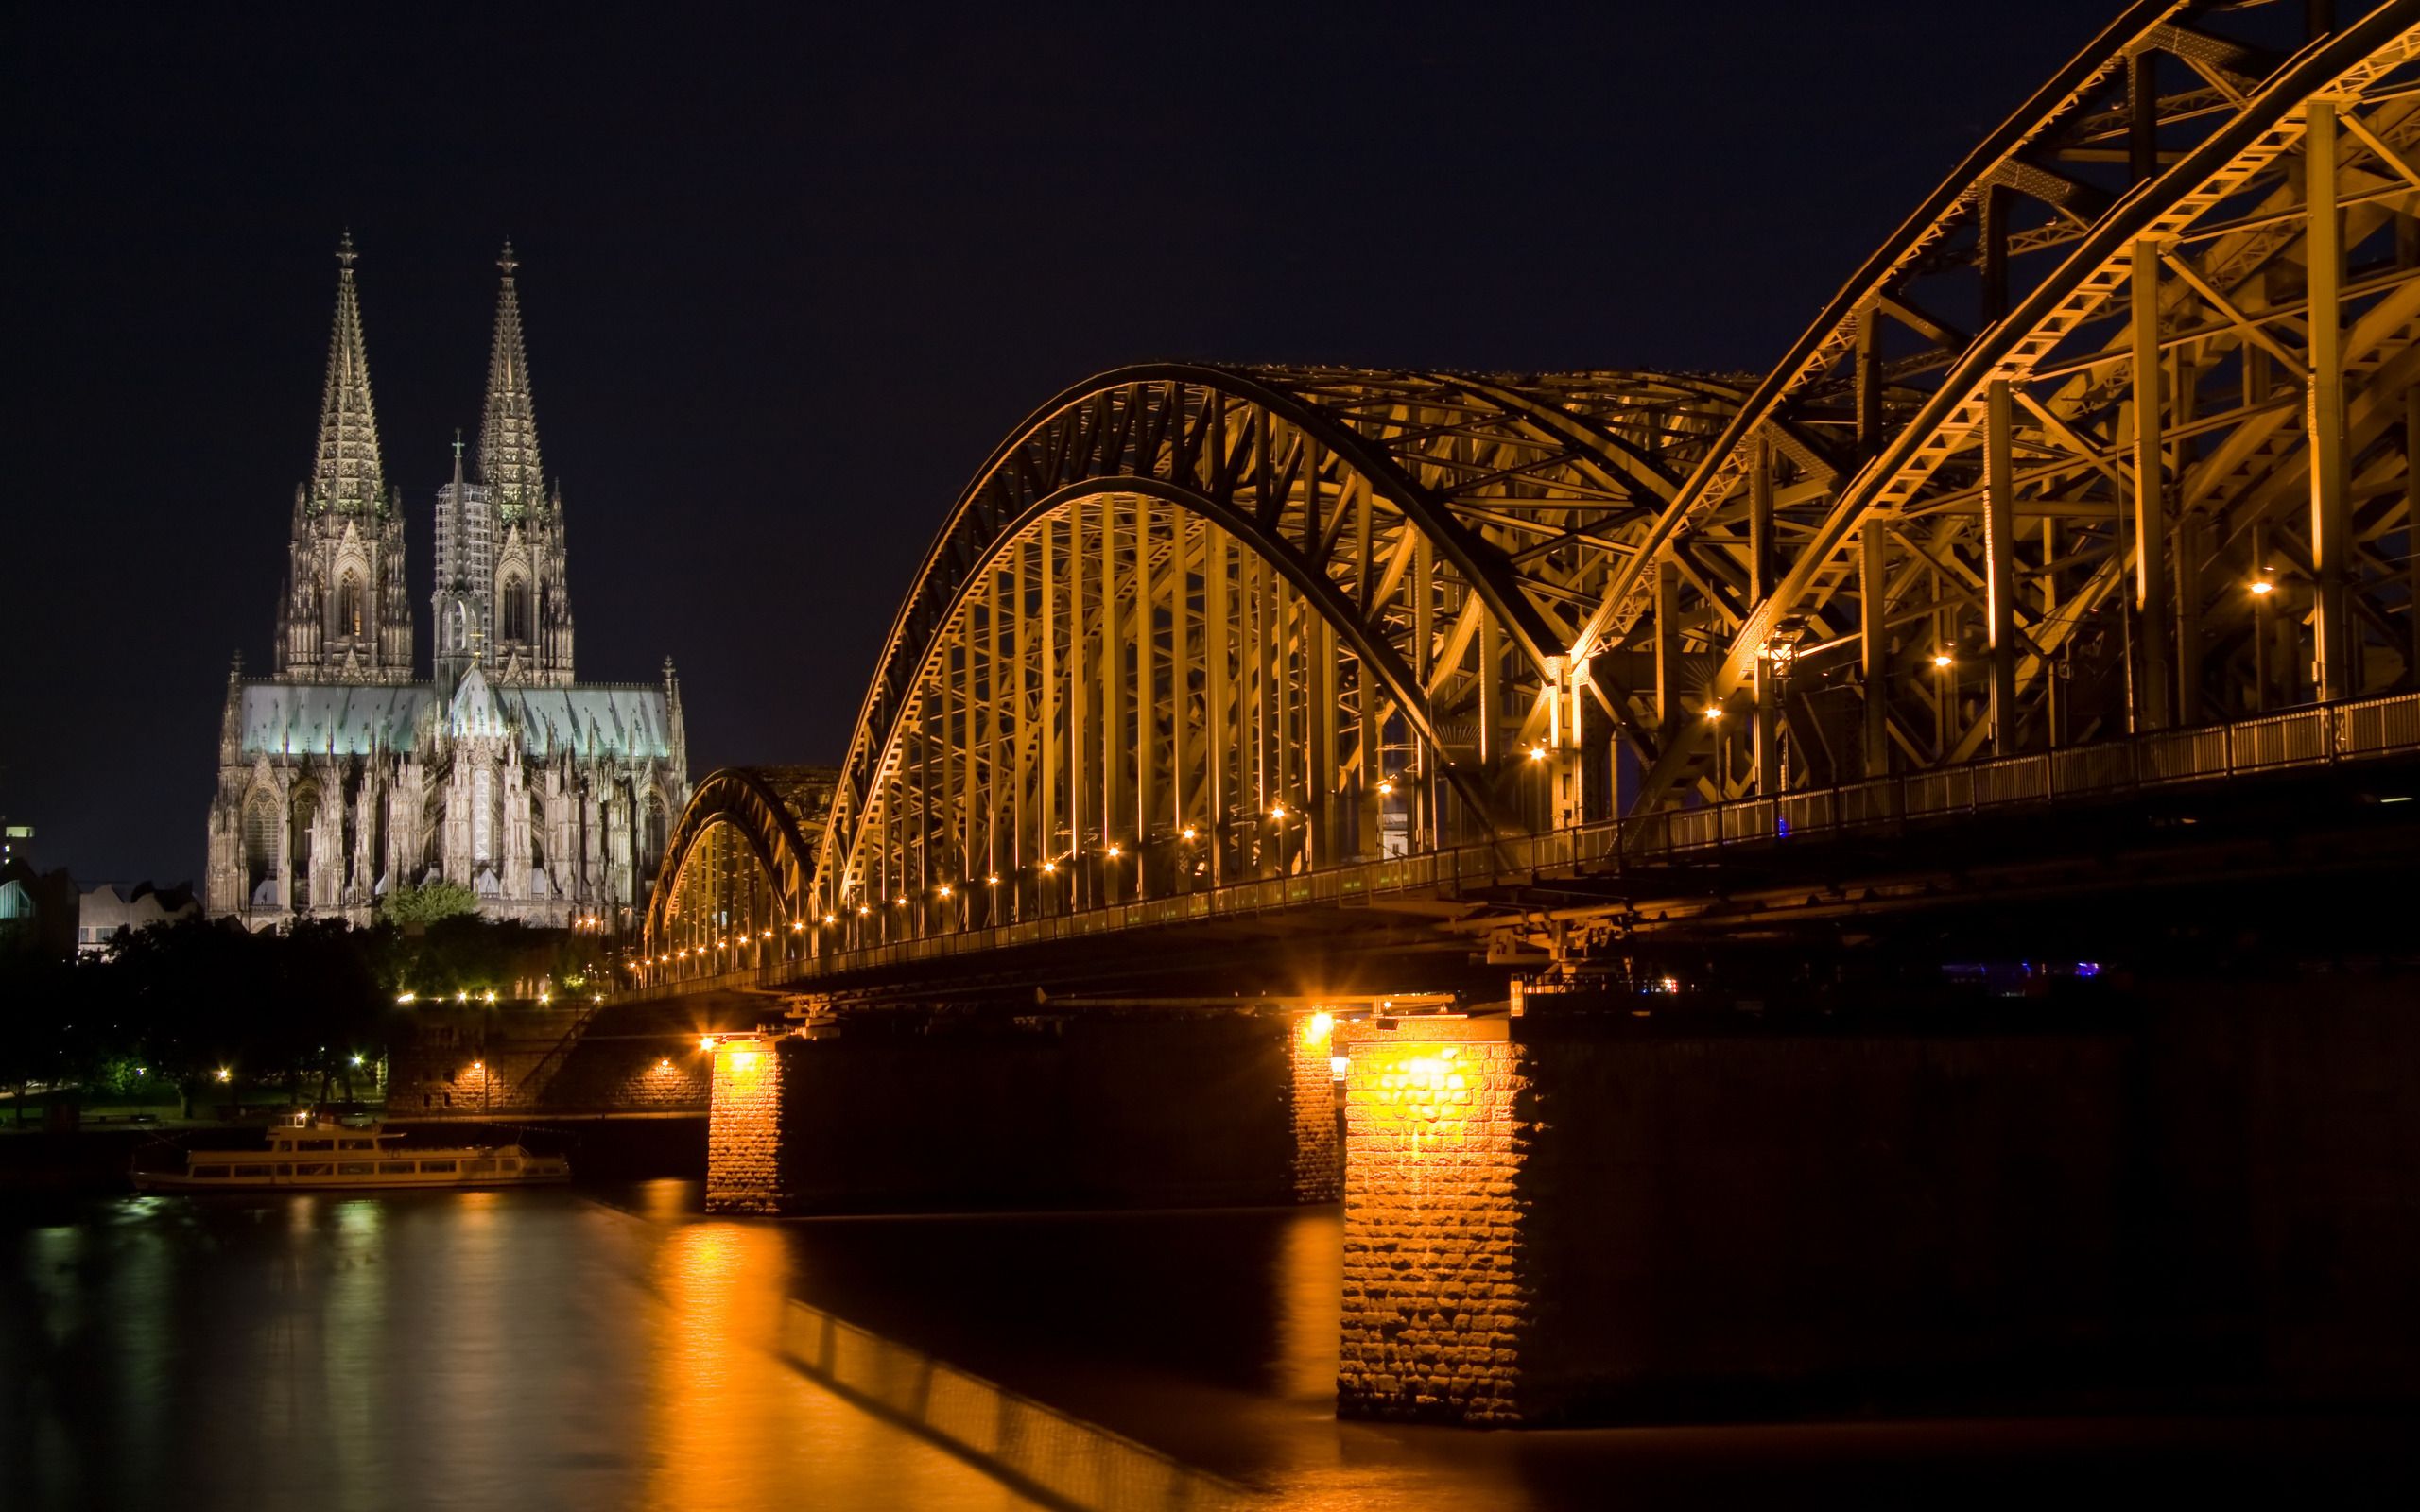 The Cologne cathedral wallpaper and image, picture. Cityscape wallpaper, Bridge, Cathedral